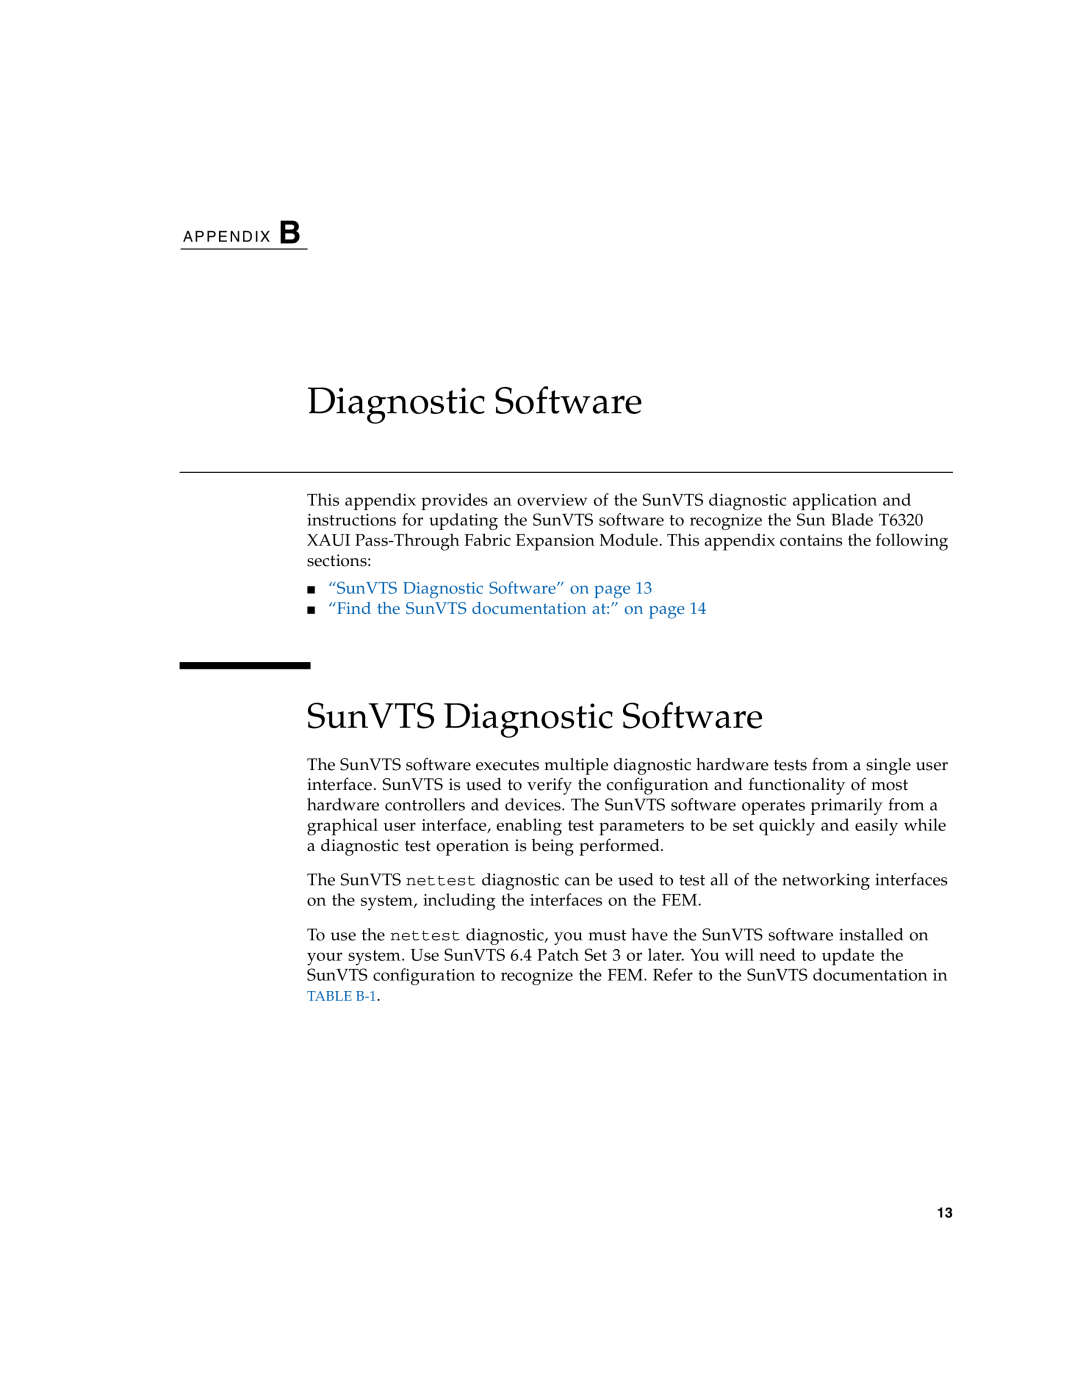 Sun Microsystems T6320 manual “SunVTS Diagnostic Software” on page, “Find the SunVTS documentation at” on page 